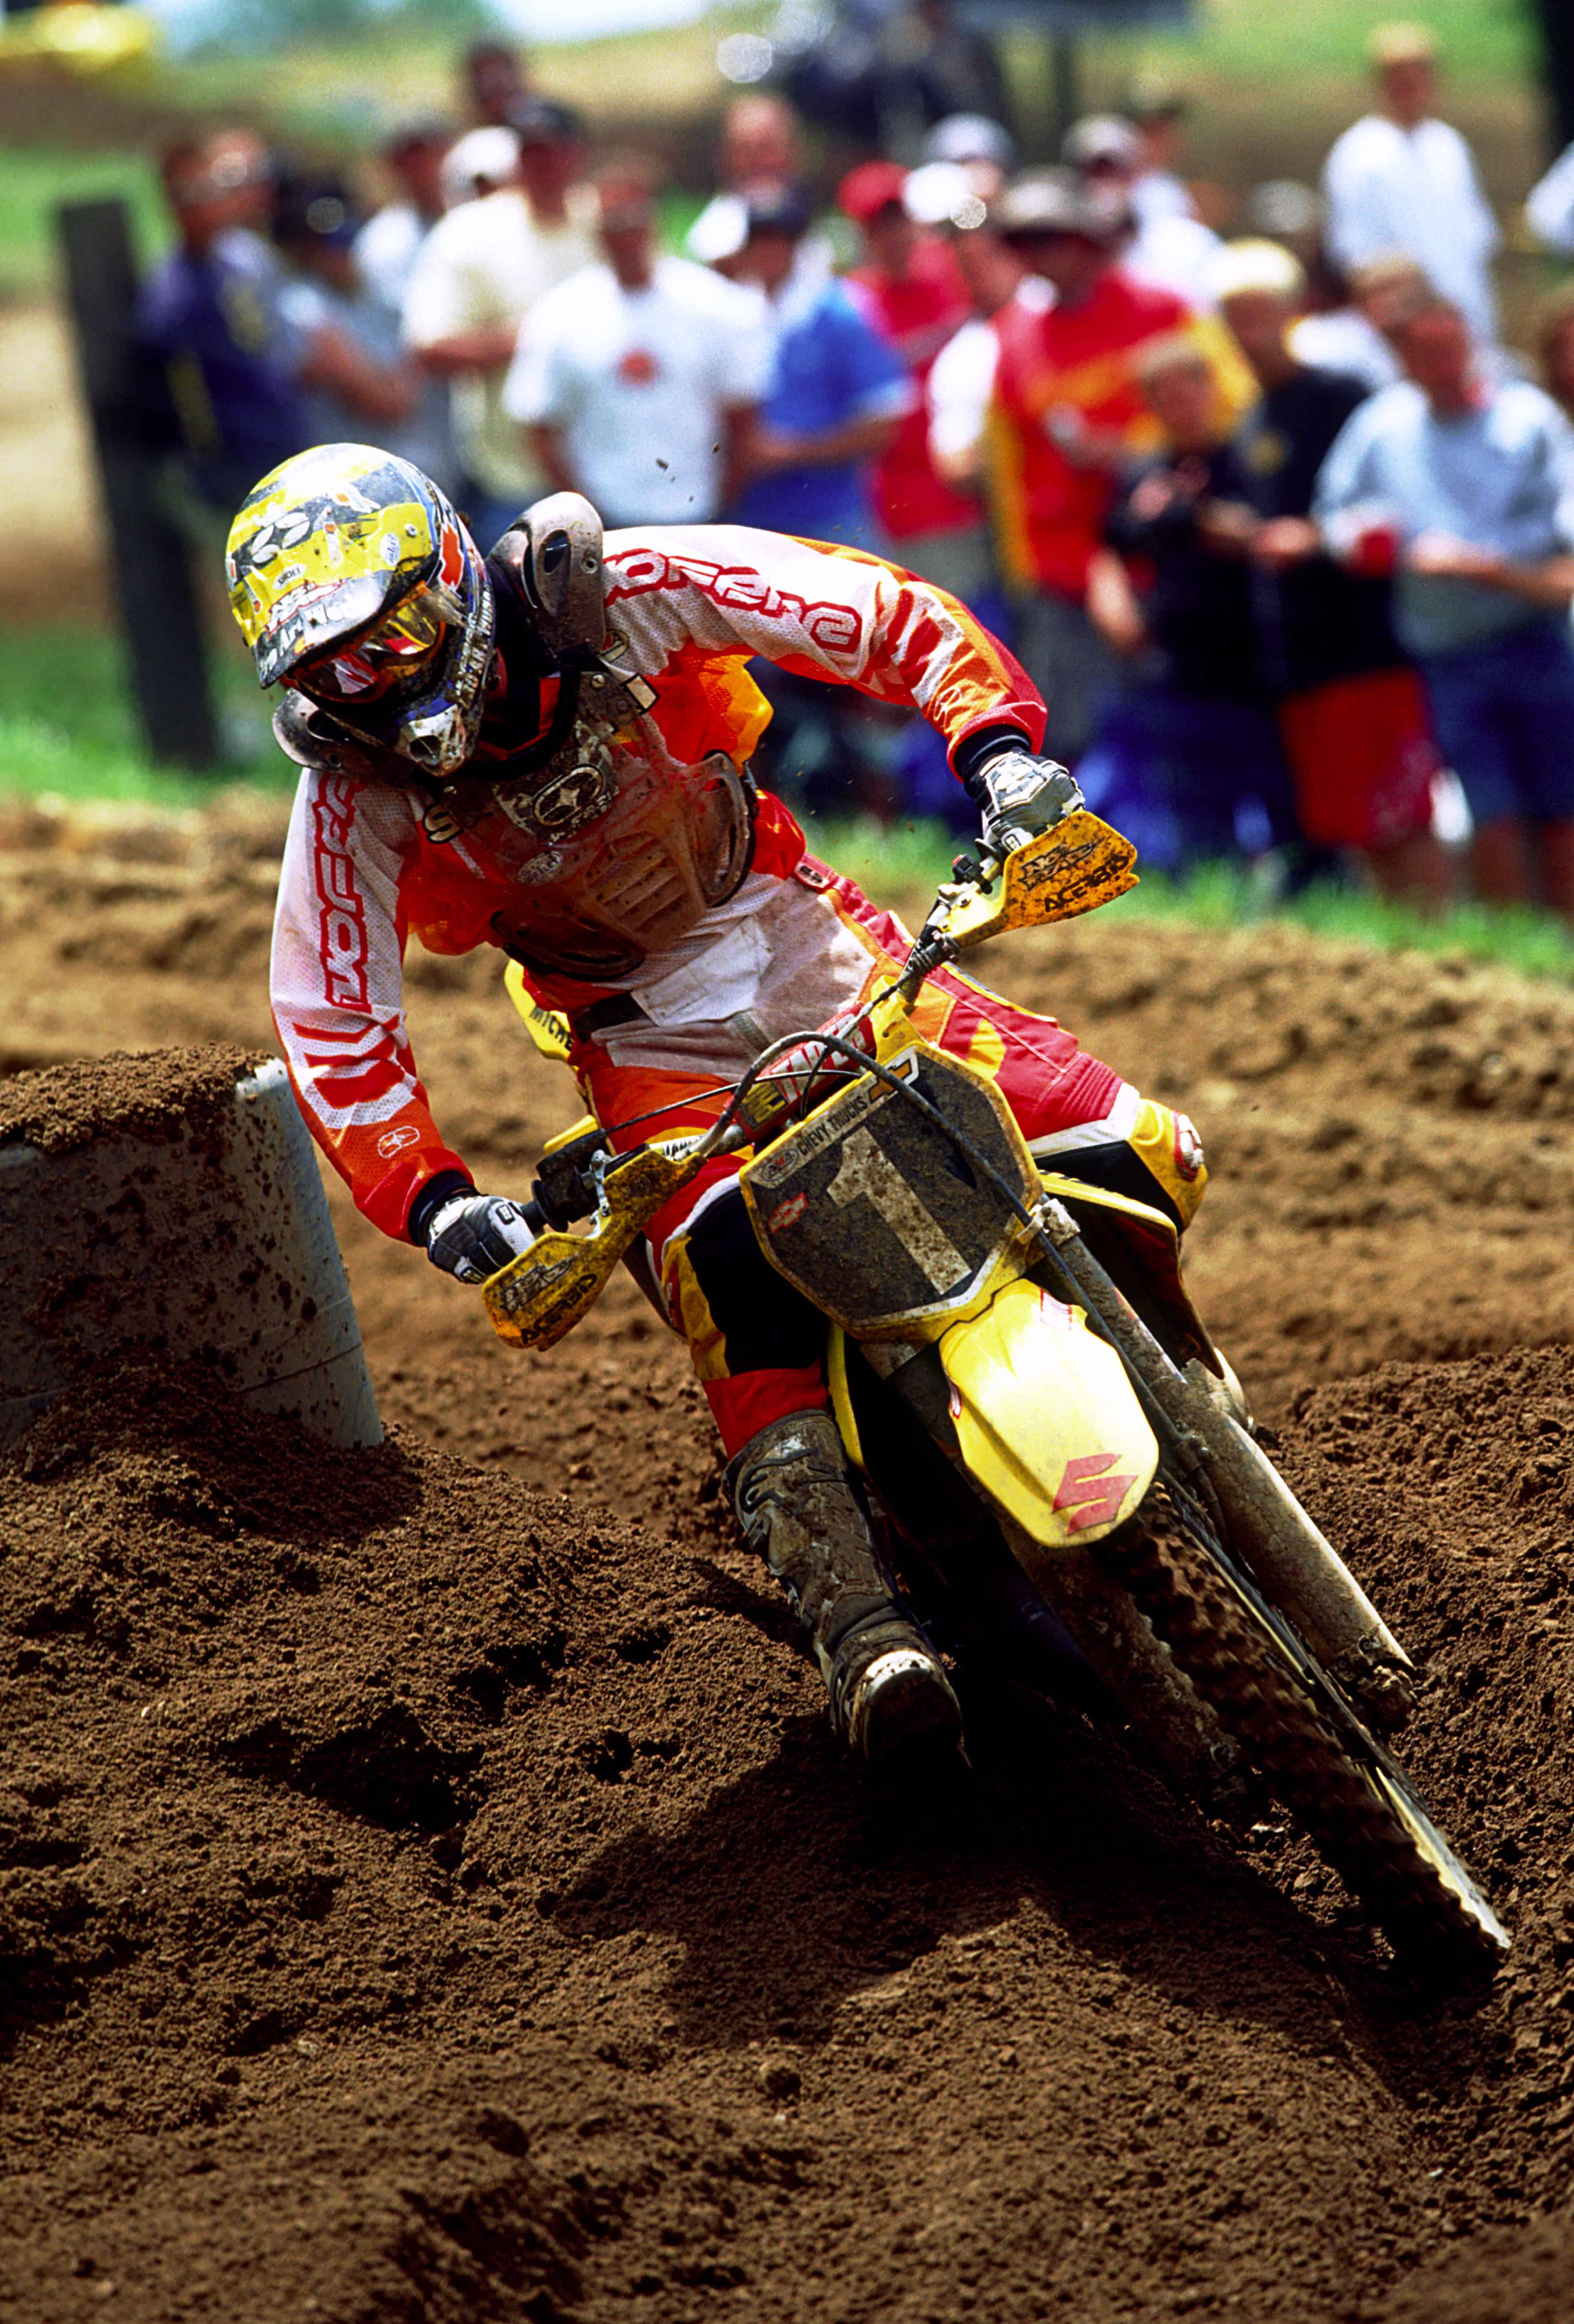 What Happened To No Fear? The Rise and Fall of a SoCal Empire - Racer X